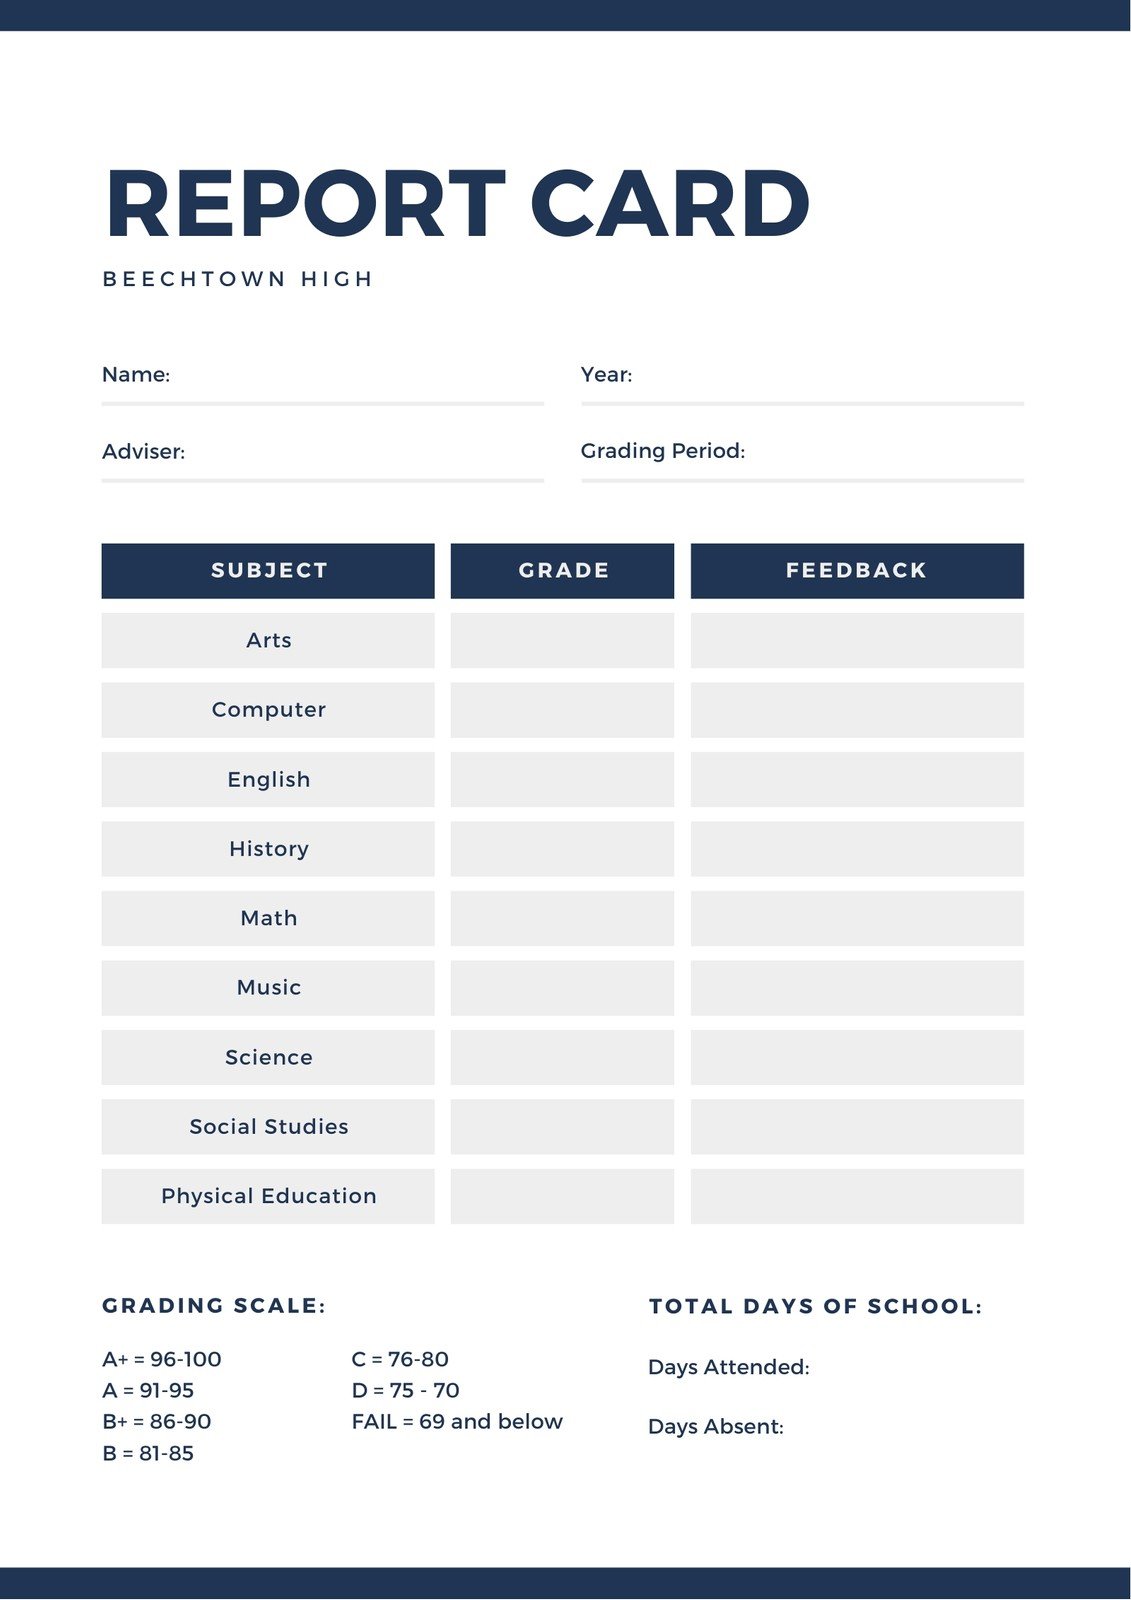 Customize 22+ High School Report Cards Templates Online - Canva With Regard To High School Report Card Template